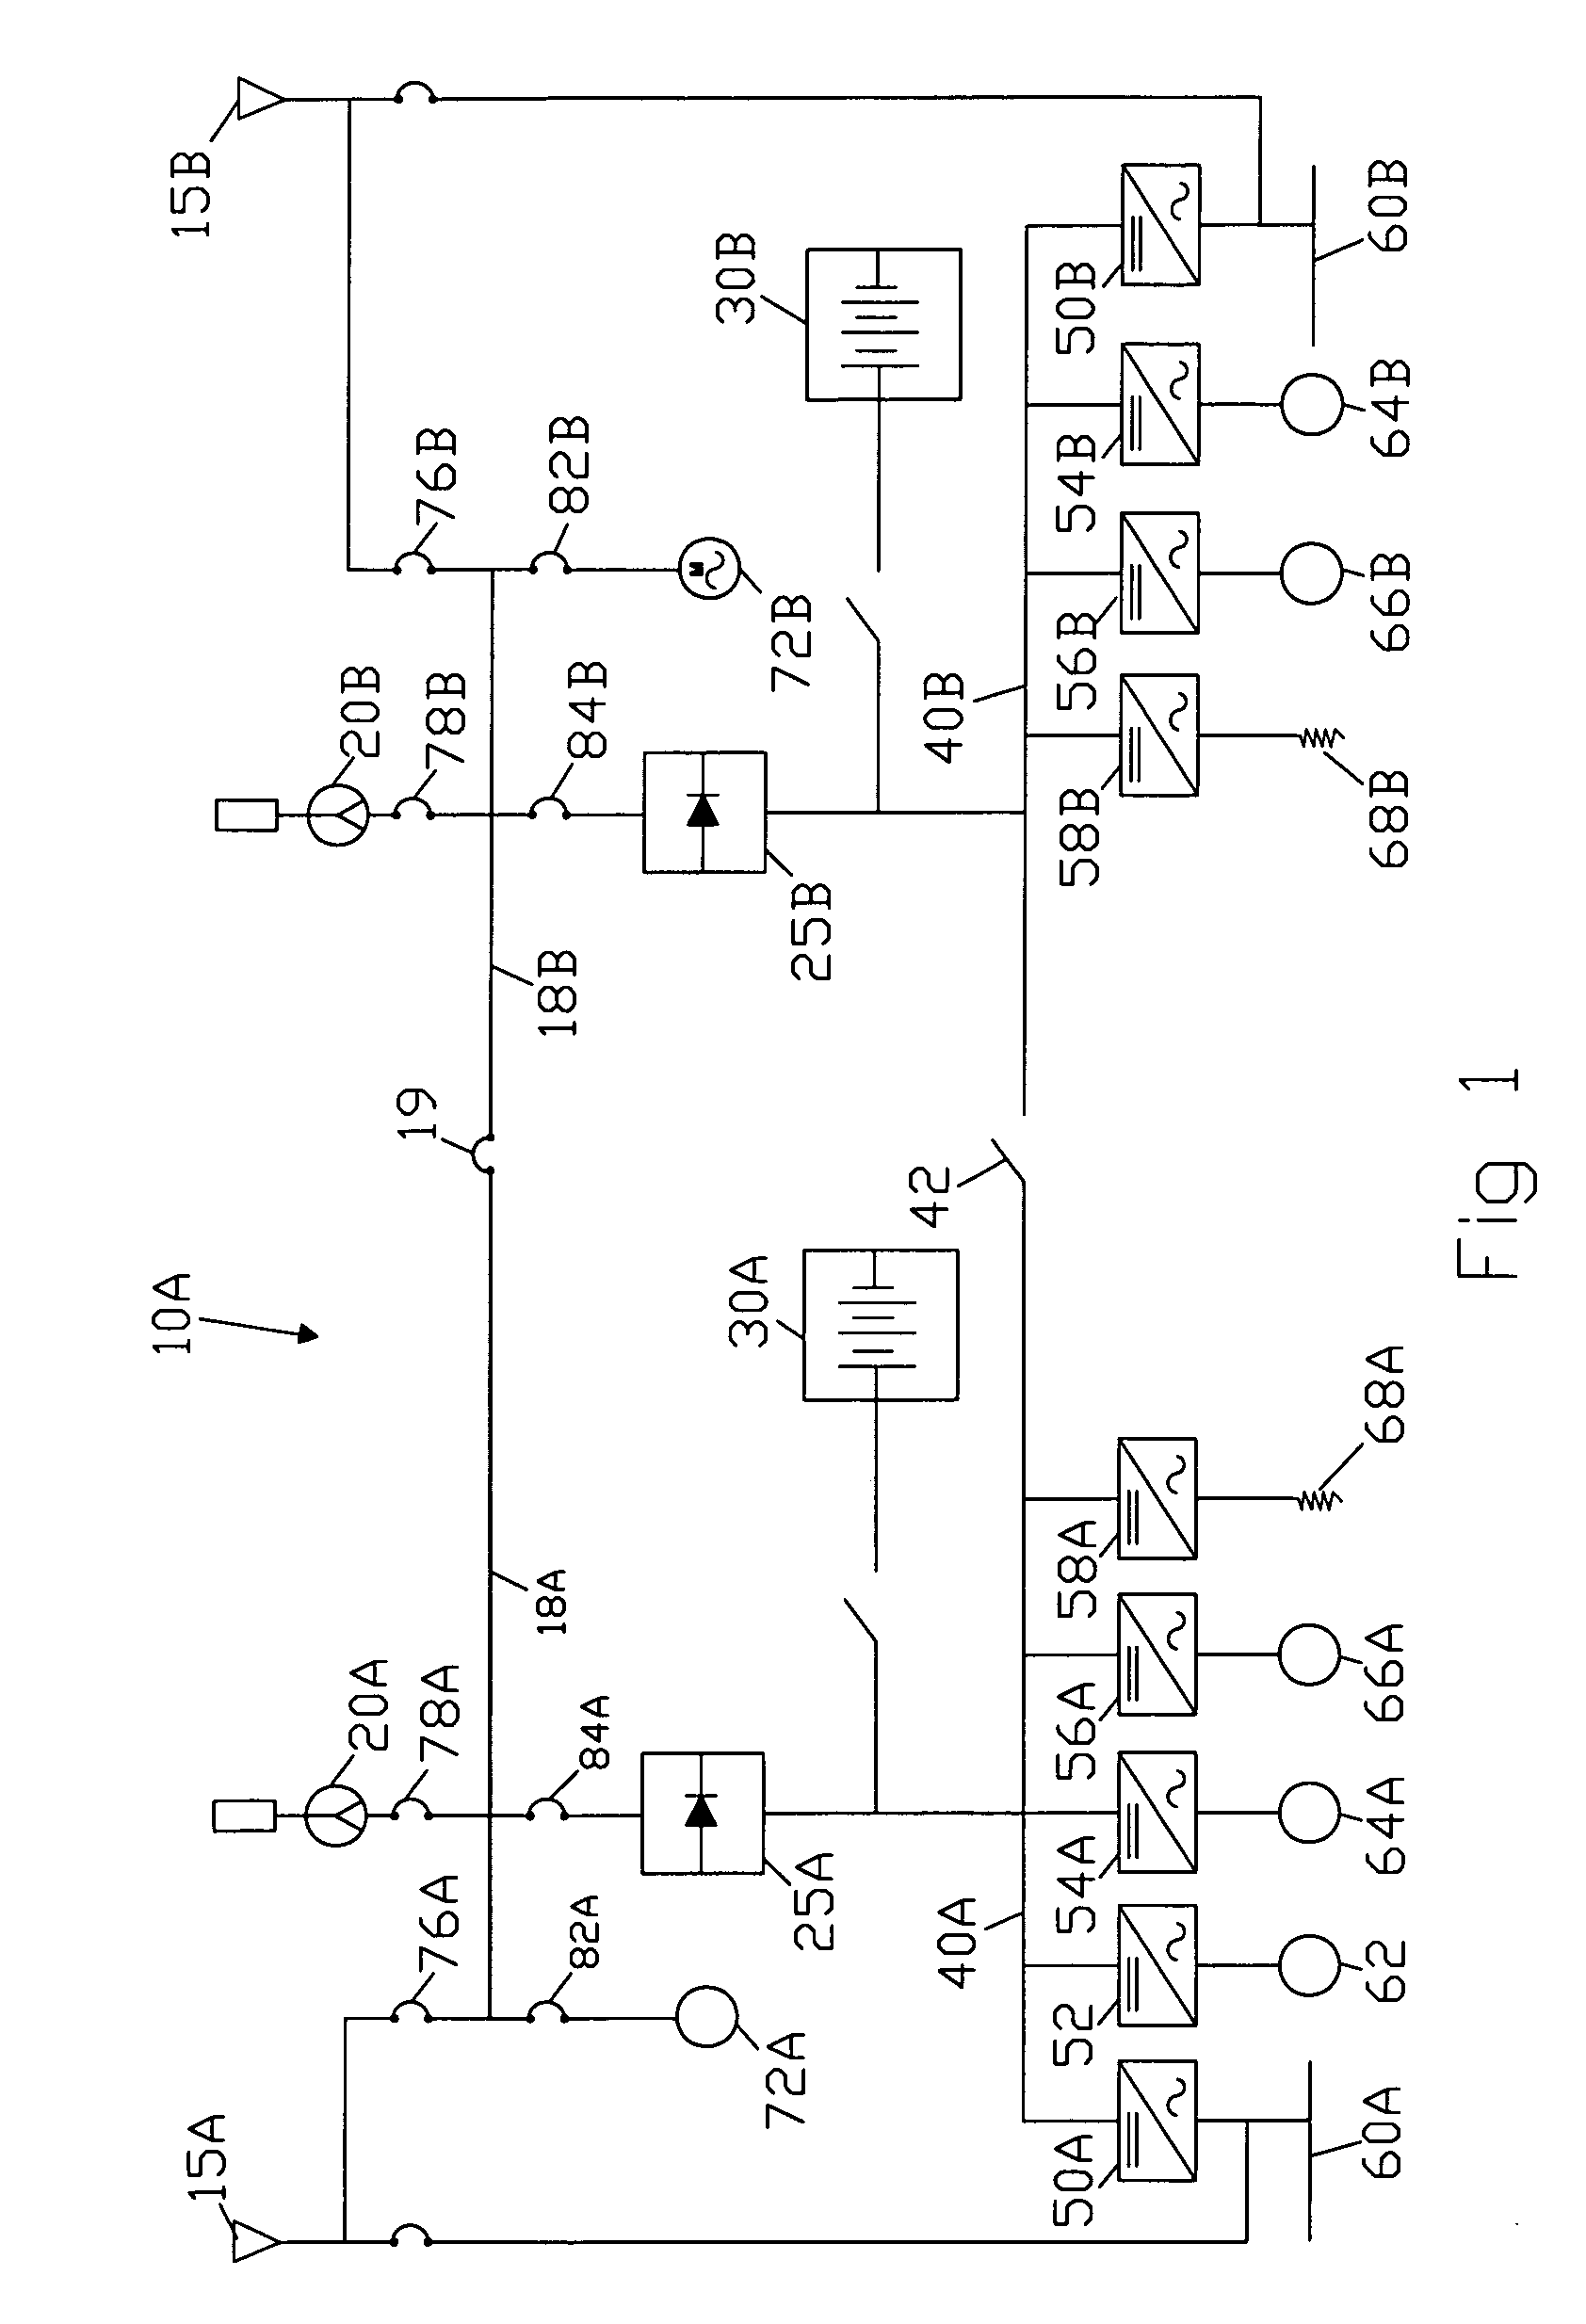 Method and apparatus for providing power to a marine vessel